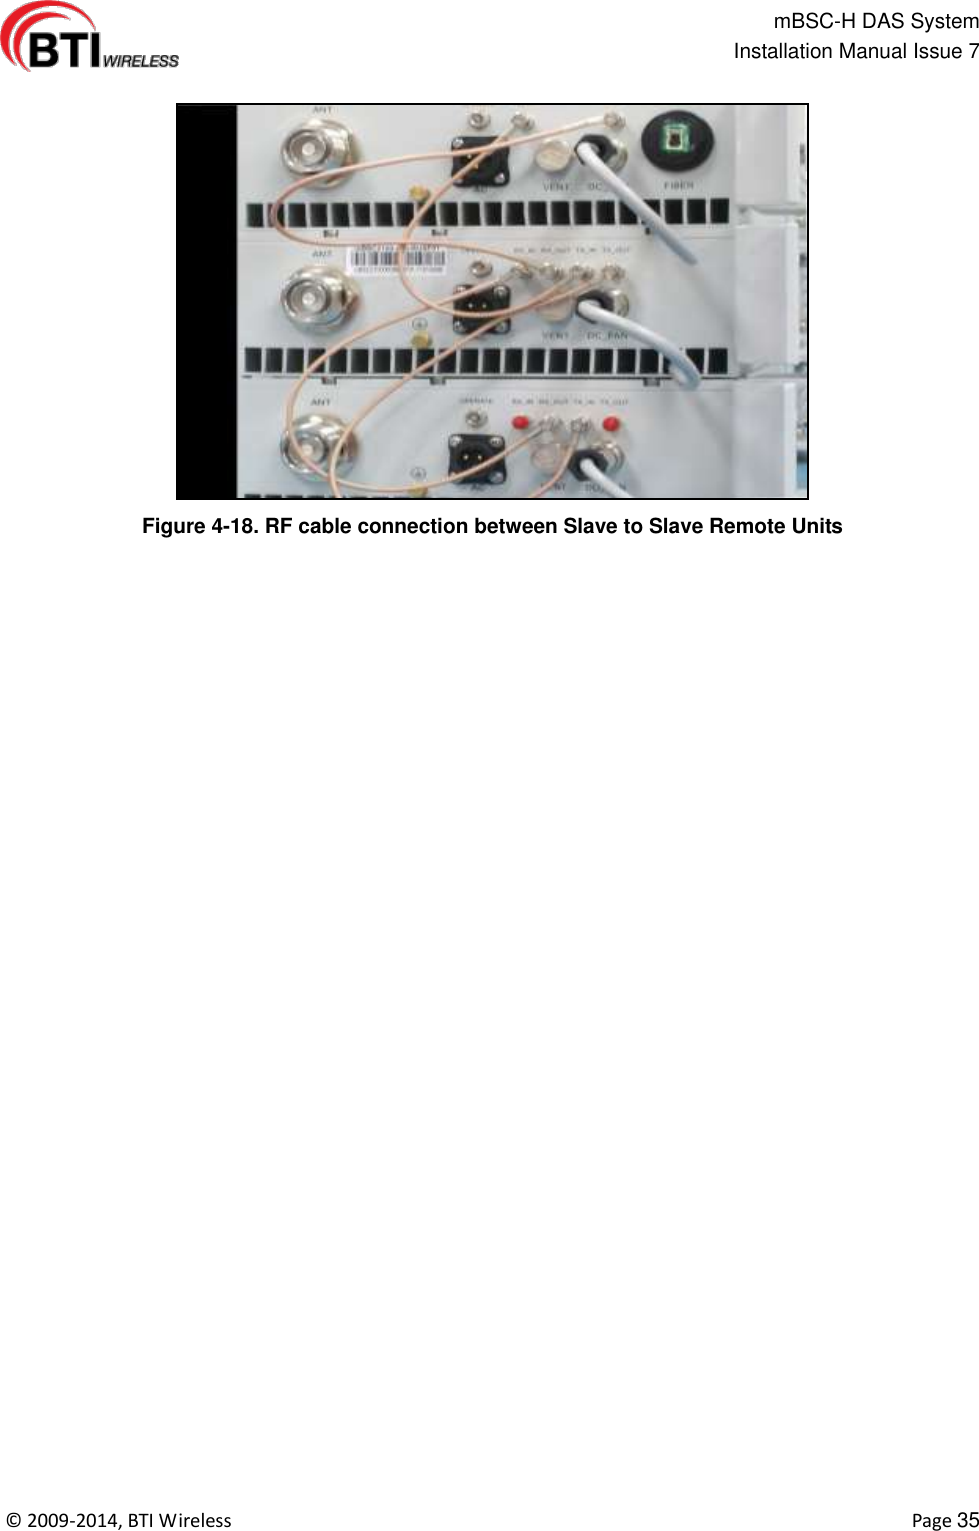                                                   mBSC-H DAS System   Installation Manual Issue 7  ©  2009-2014, BTI Wireless    Page 35  Figure 4-18. RF cable connection between Slave to Slave Remote Units   